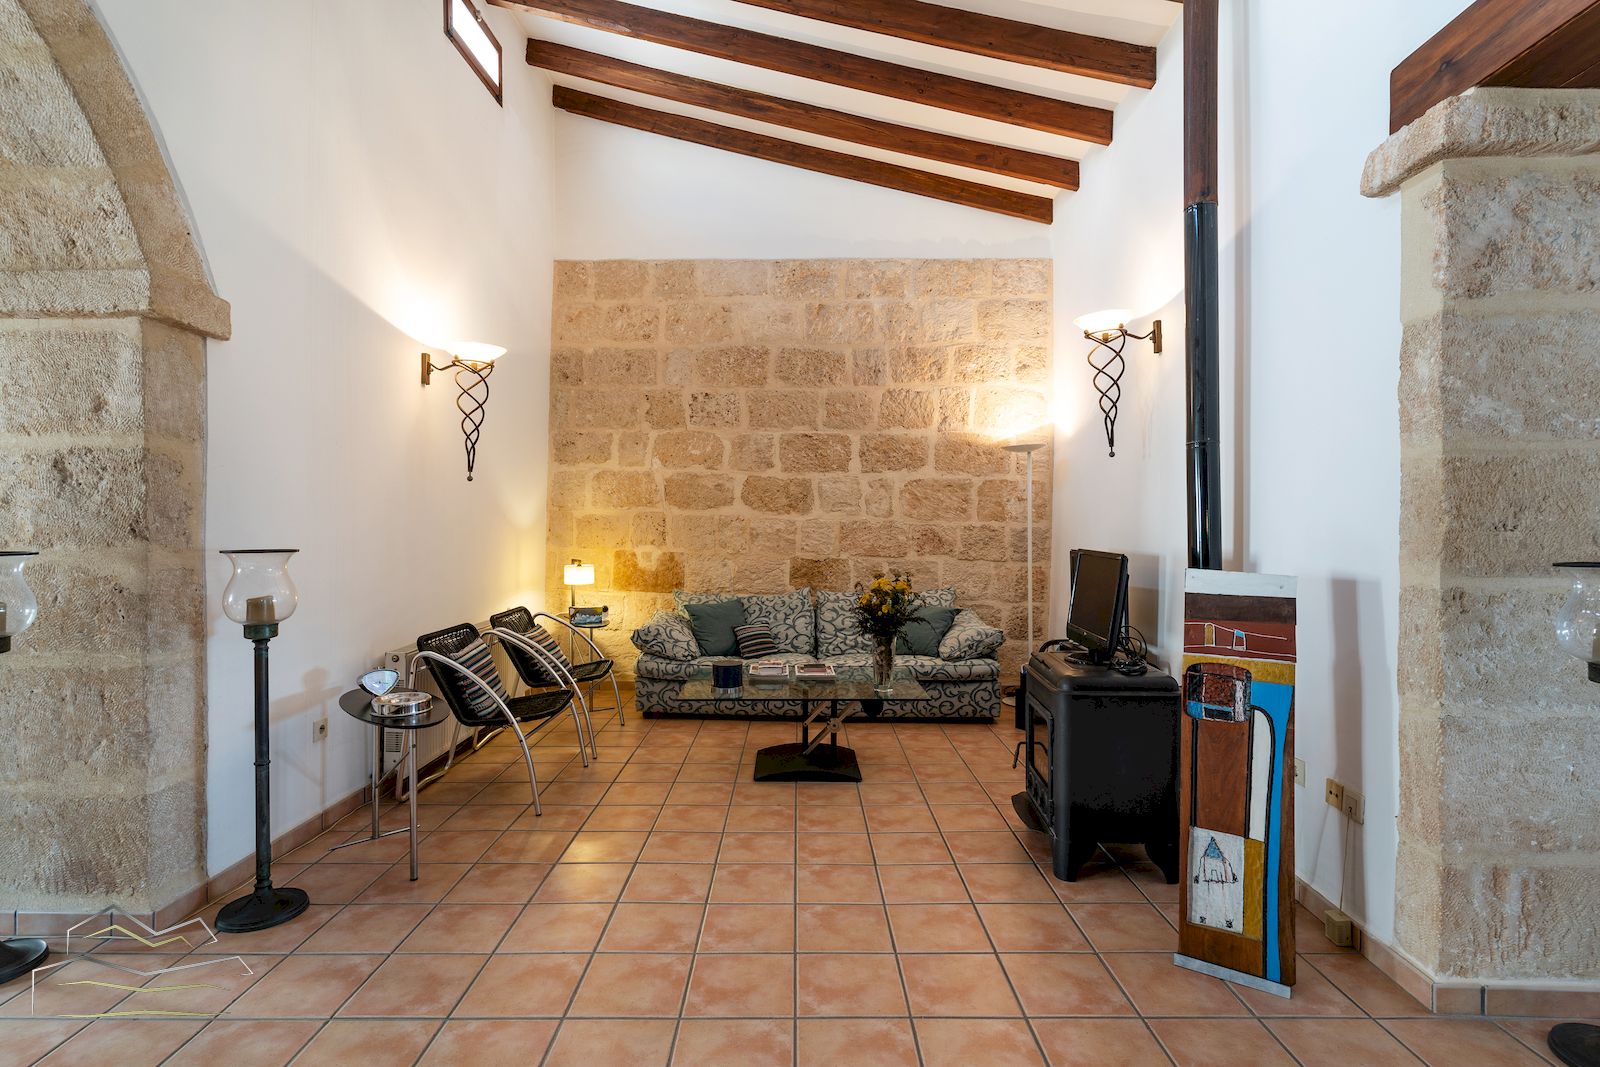 Townhouse for Sale in the Old Town of Javea